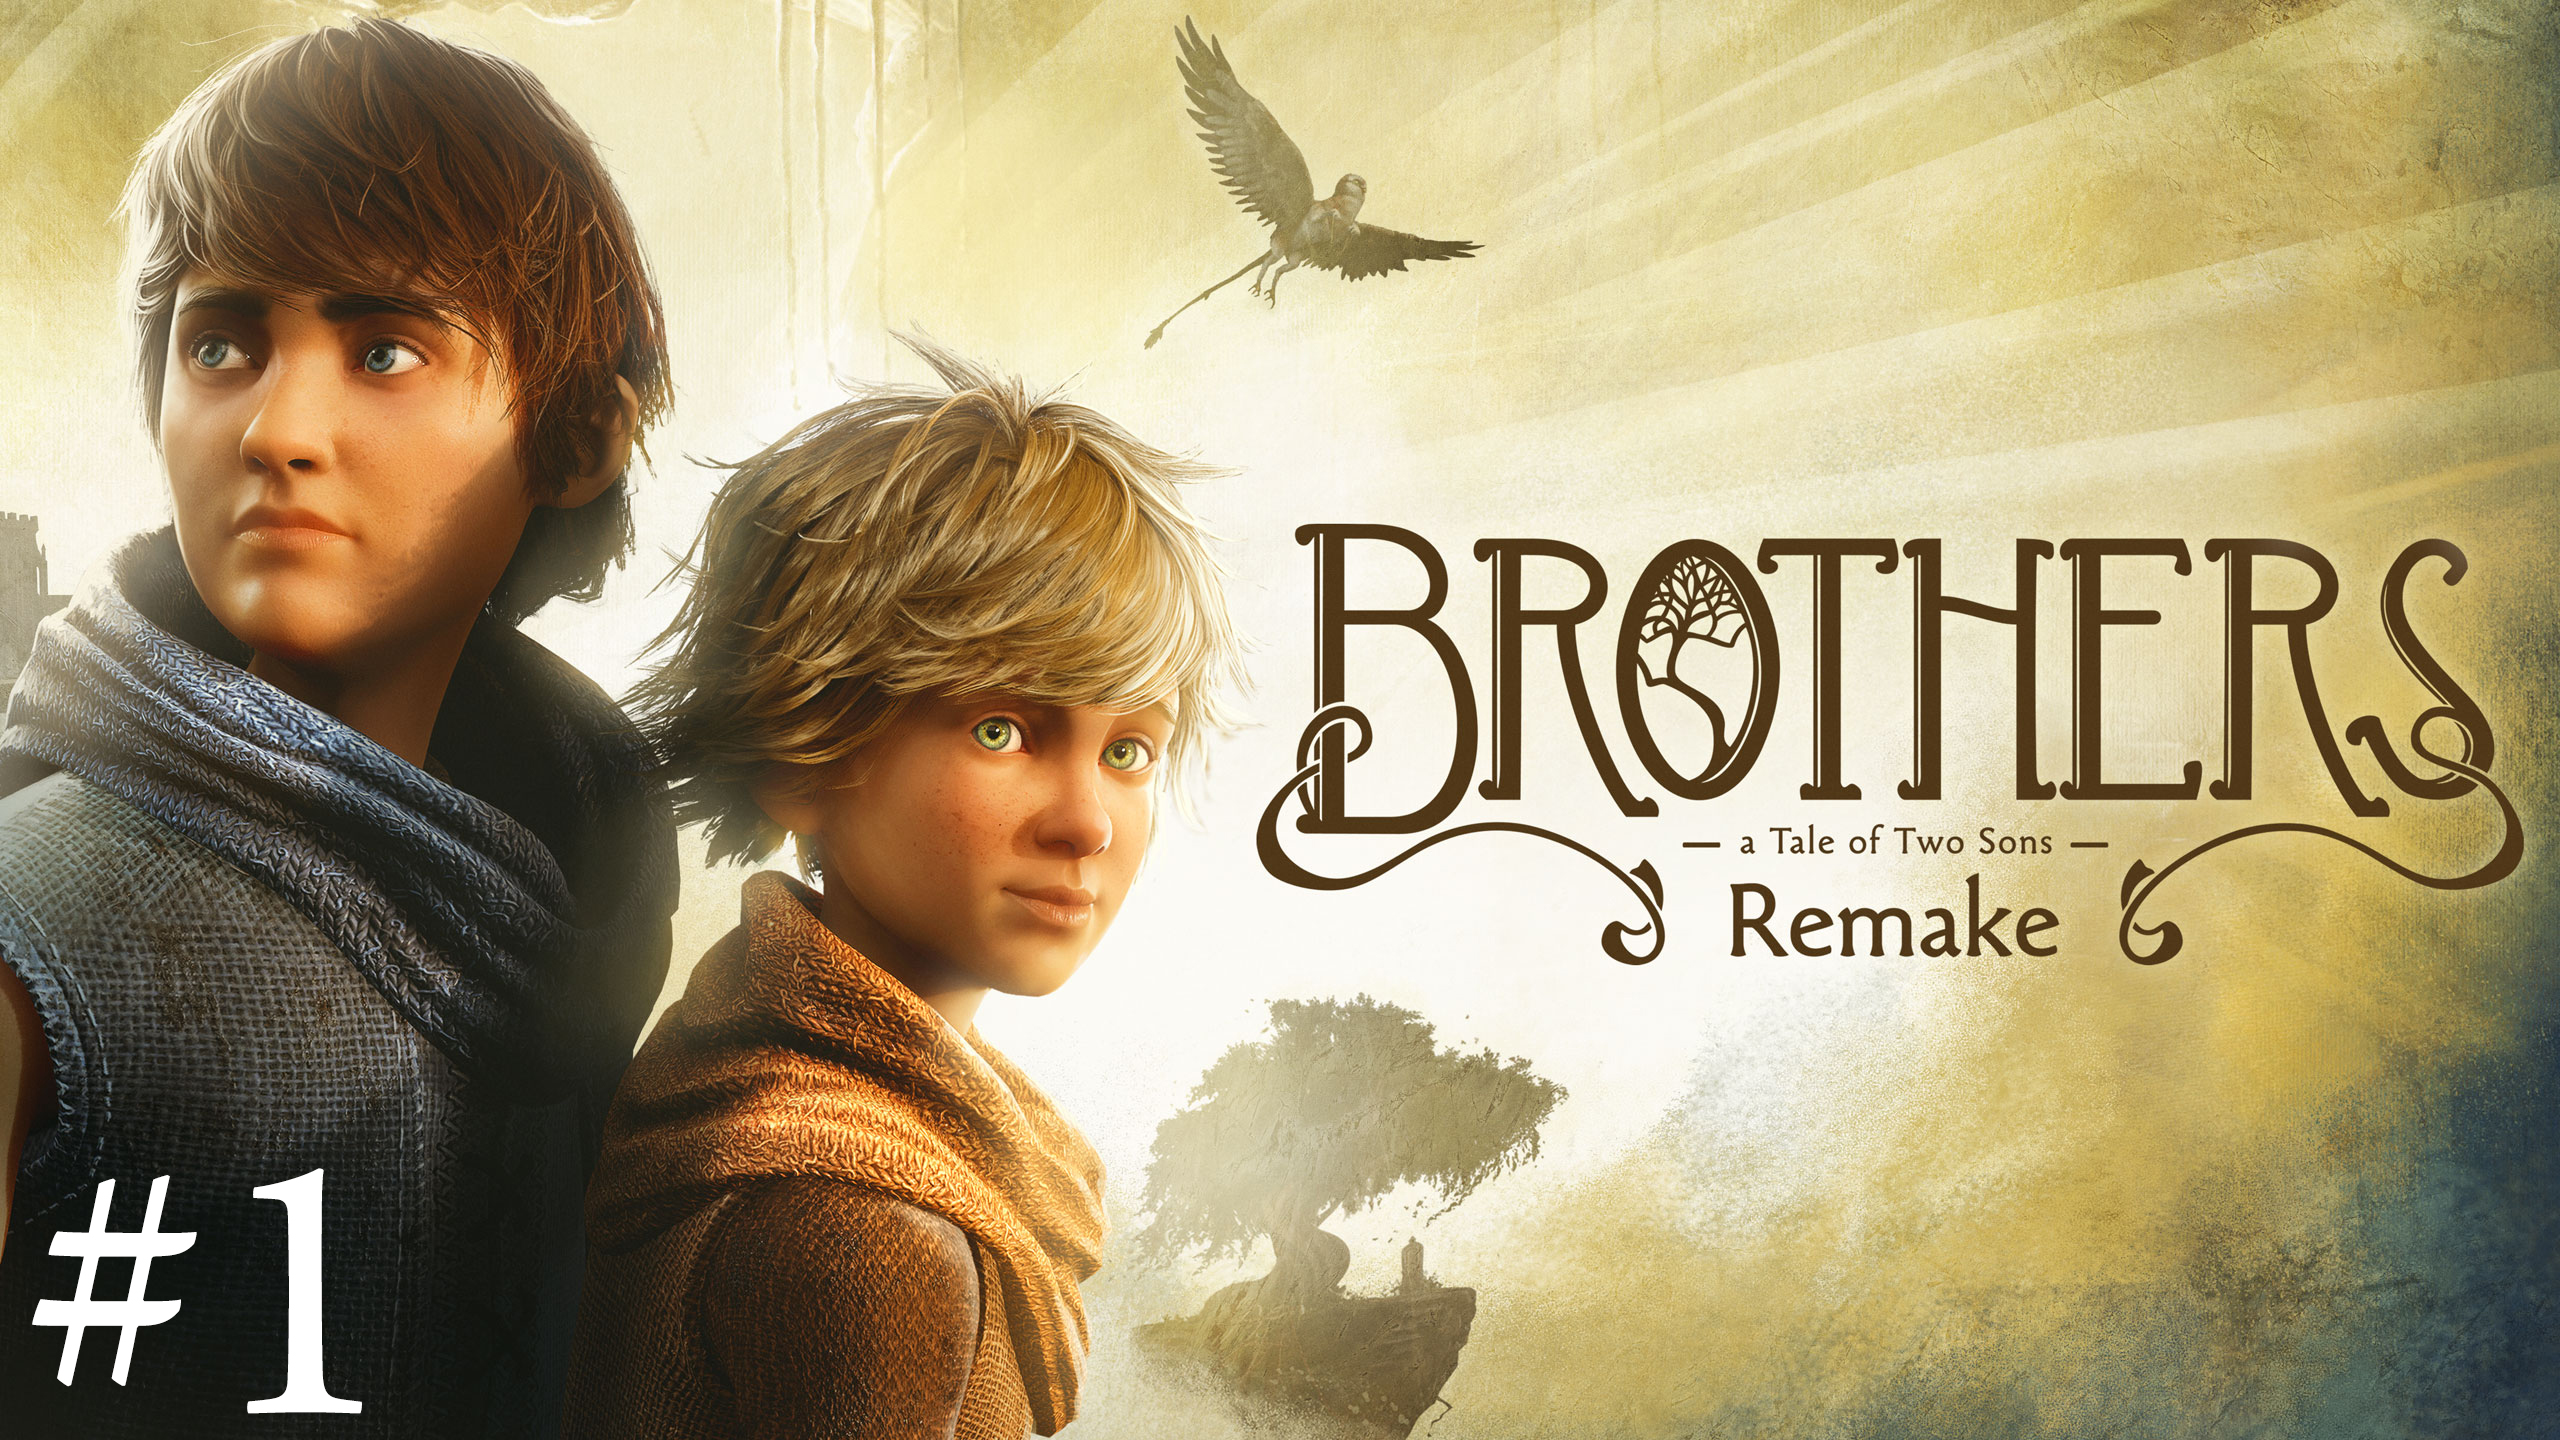 Братья. Brothers: A Tale of Two Sons Remake #1